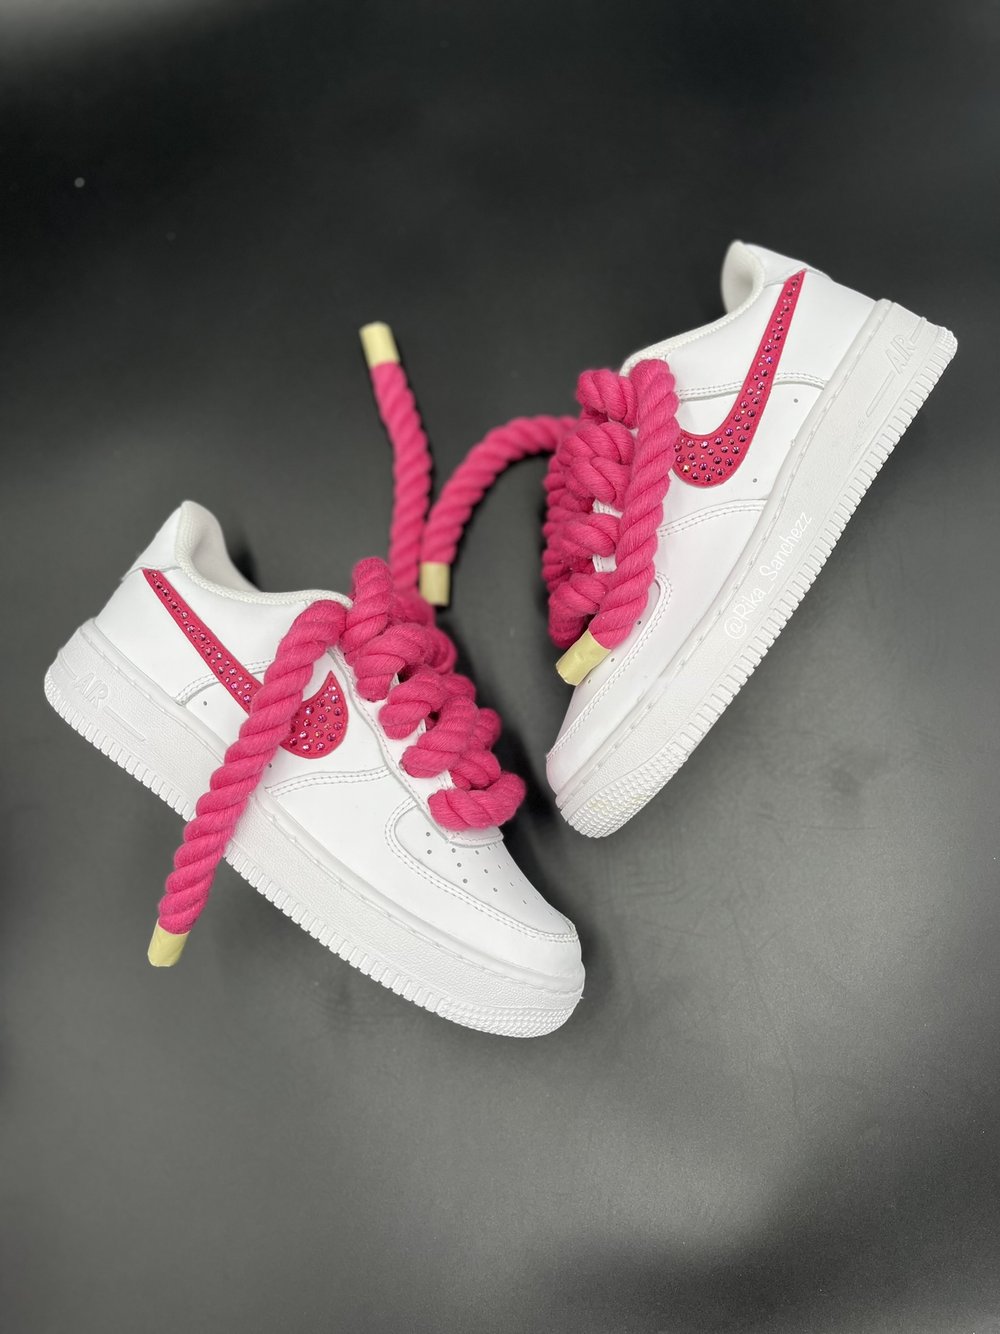 How to make Rope Laces on Custom Air Force 1 